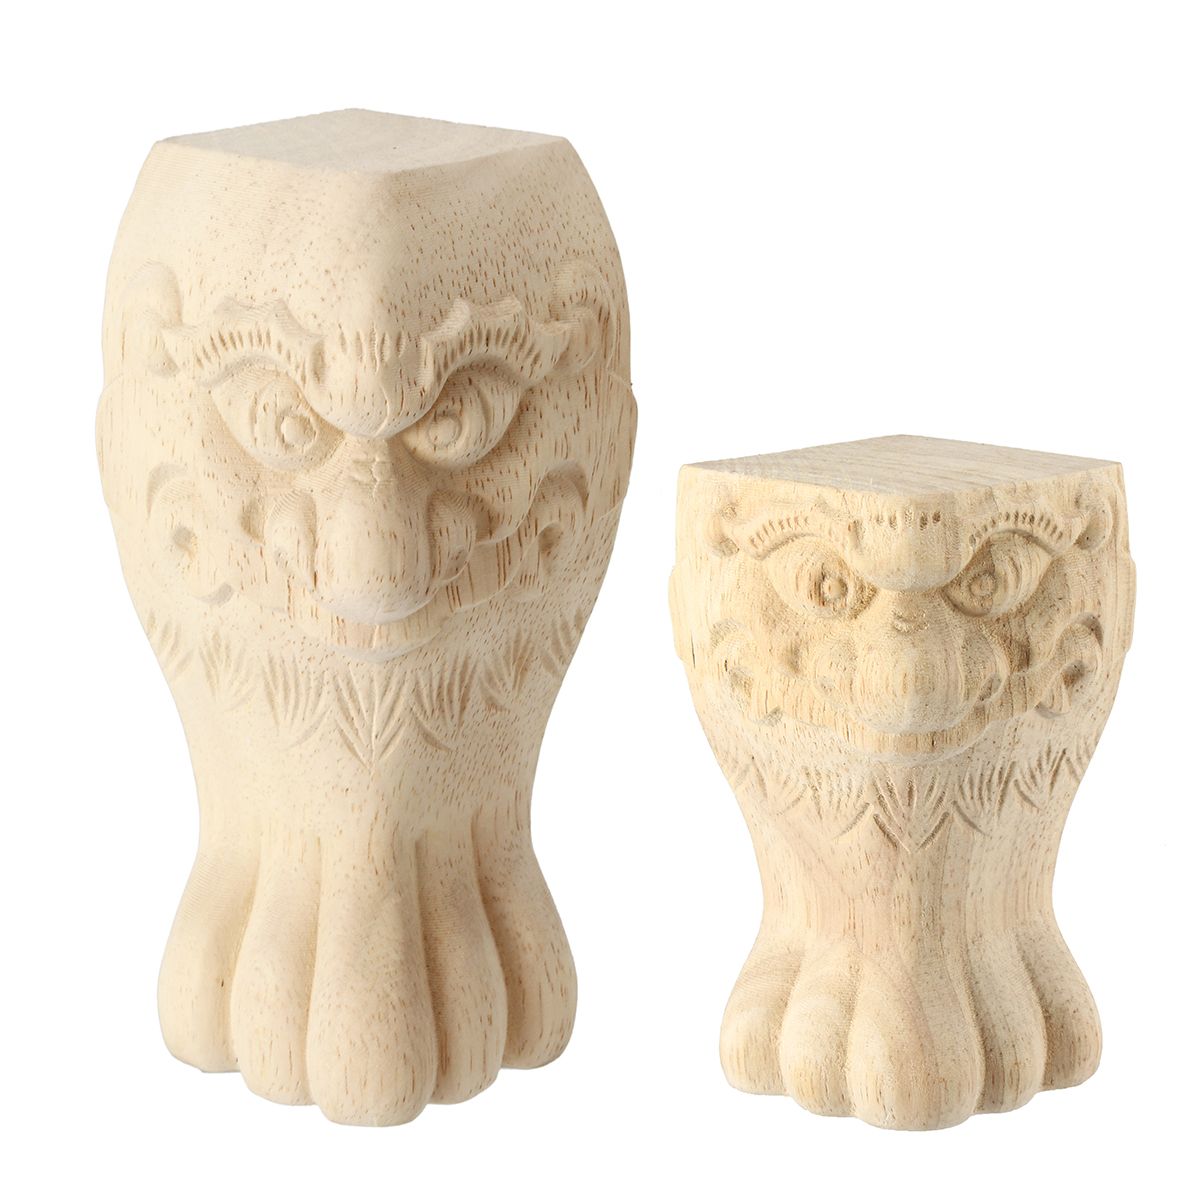 4Pcs-1015cm-European-Solid-Wood-Carving-Furniture-Foot-Legs-Unpainted-Cabinet-Feets-Wood-Decal-1322664